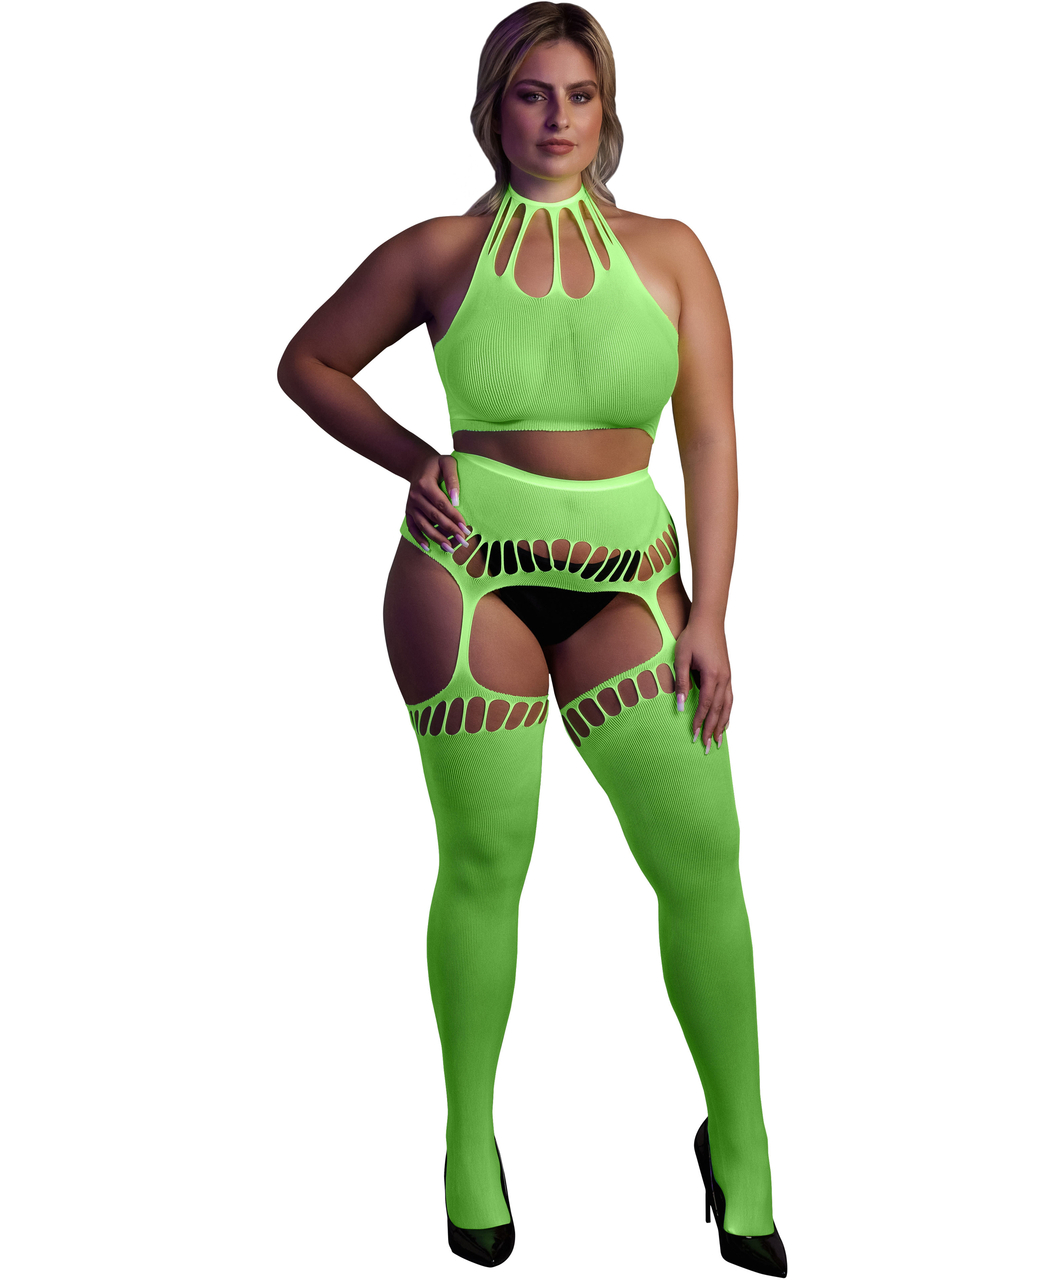 Ouch! Glow neon green net crop top & crotchless tights